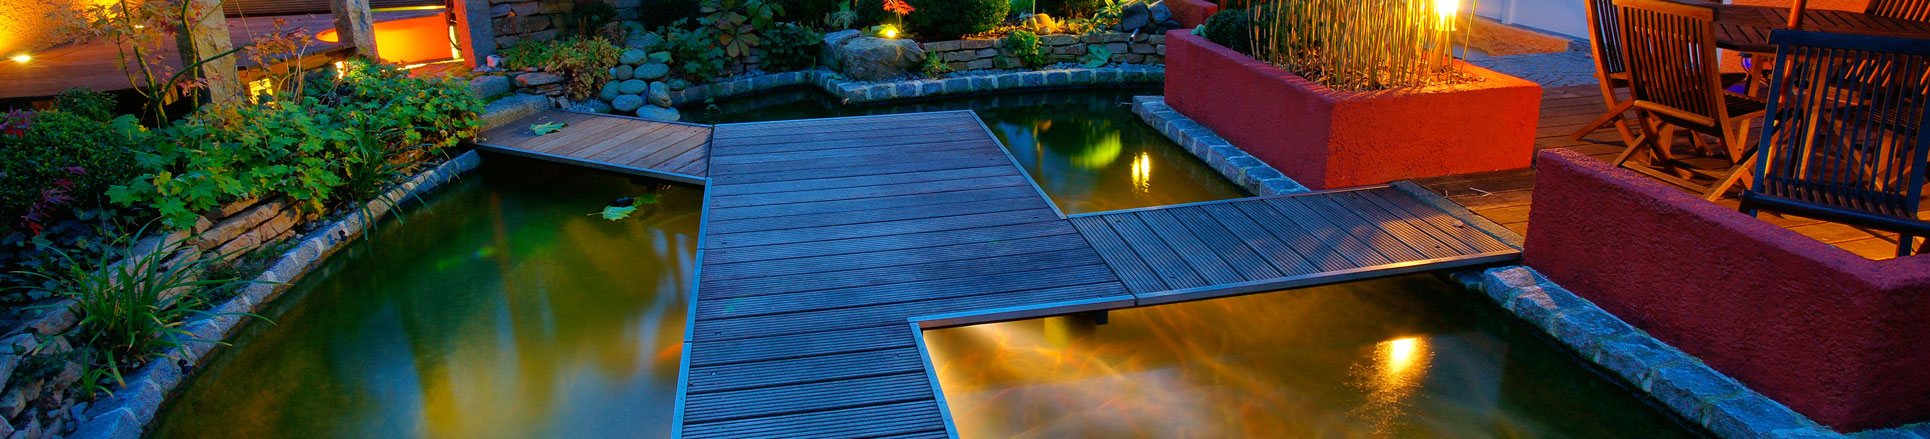 San Diego Water Feature Installation | San Diego Landscape Lighting & Led Lighting